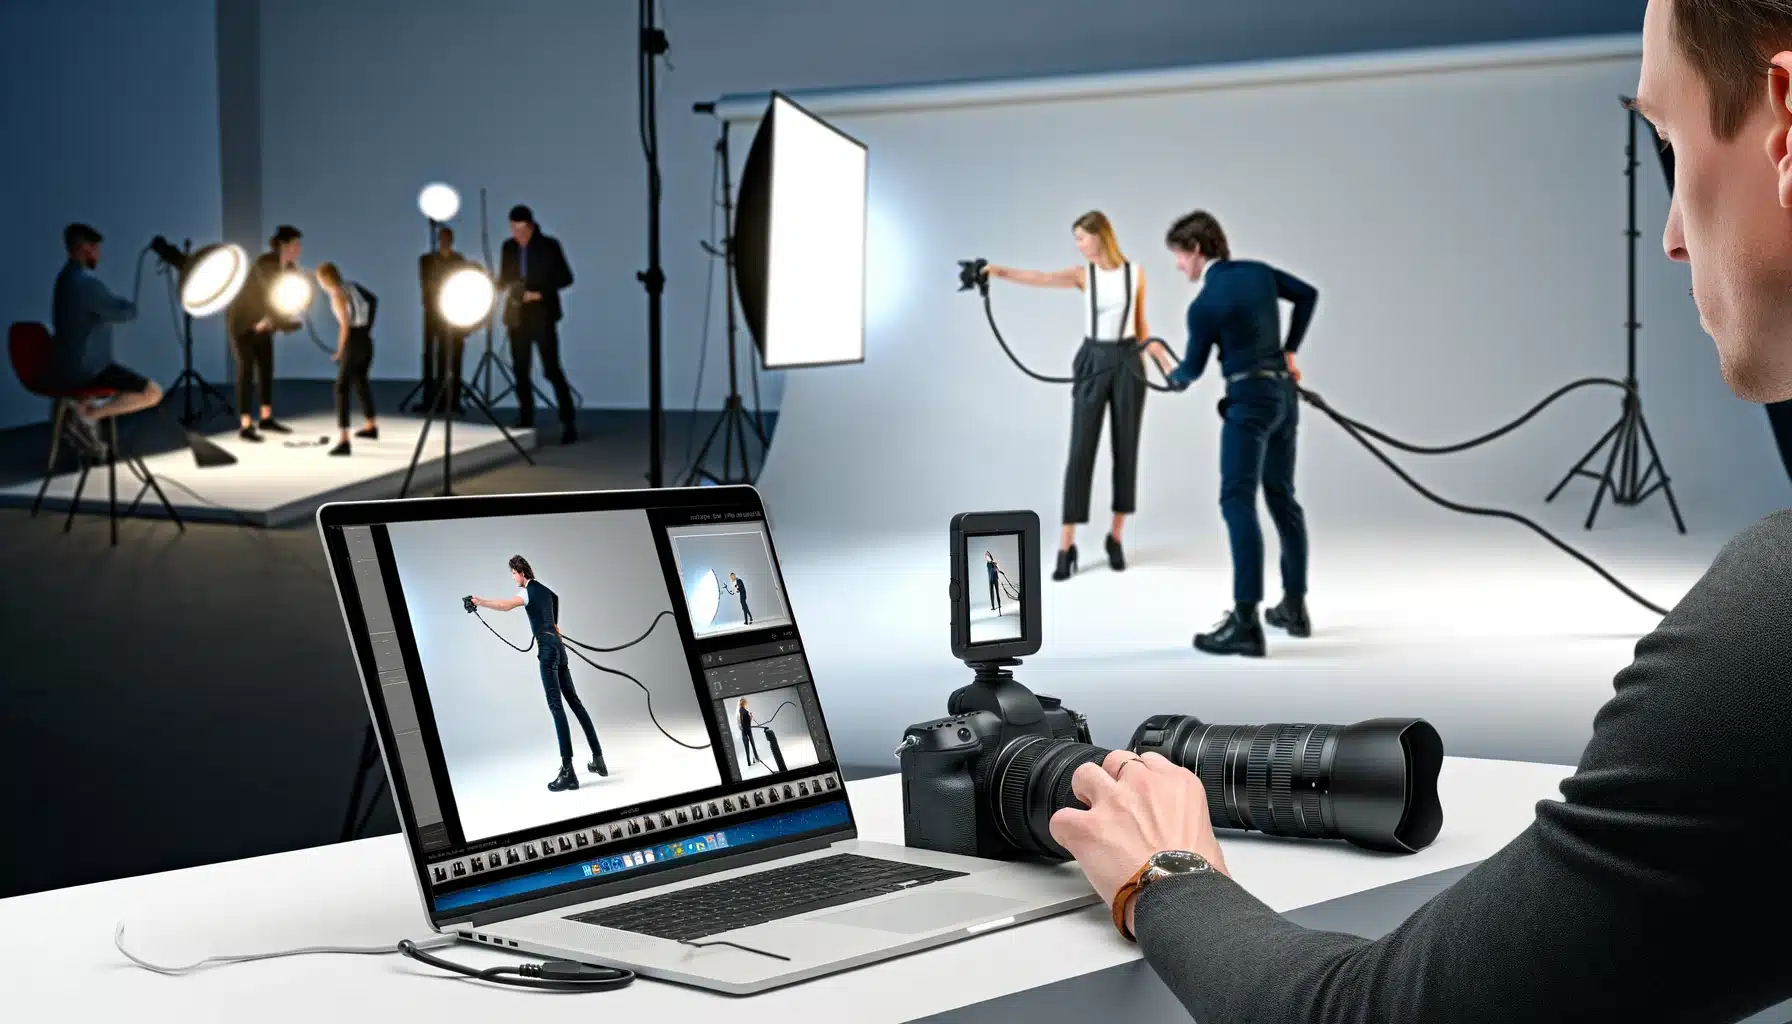 Two individuals in a photography studio, one adjusting a camera and the other monitoring images on a laptop, showcasing camera tethering for professional quality shots.